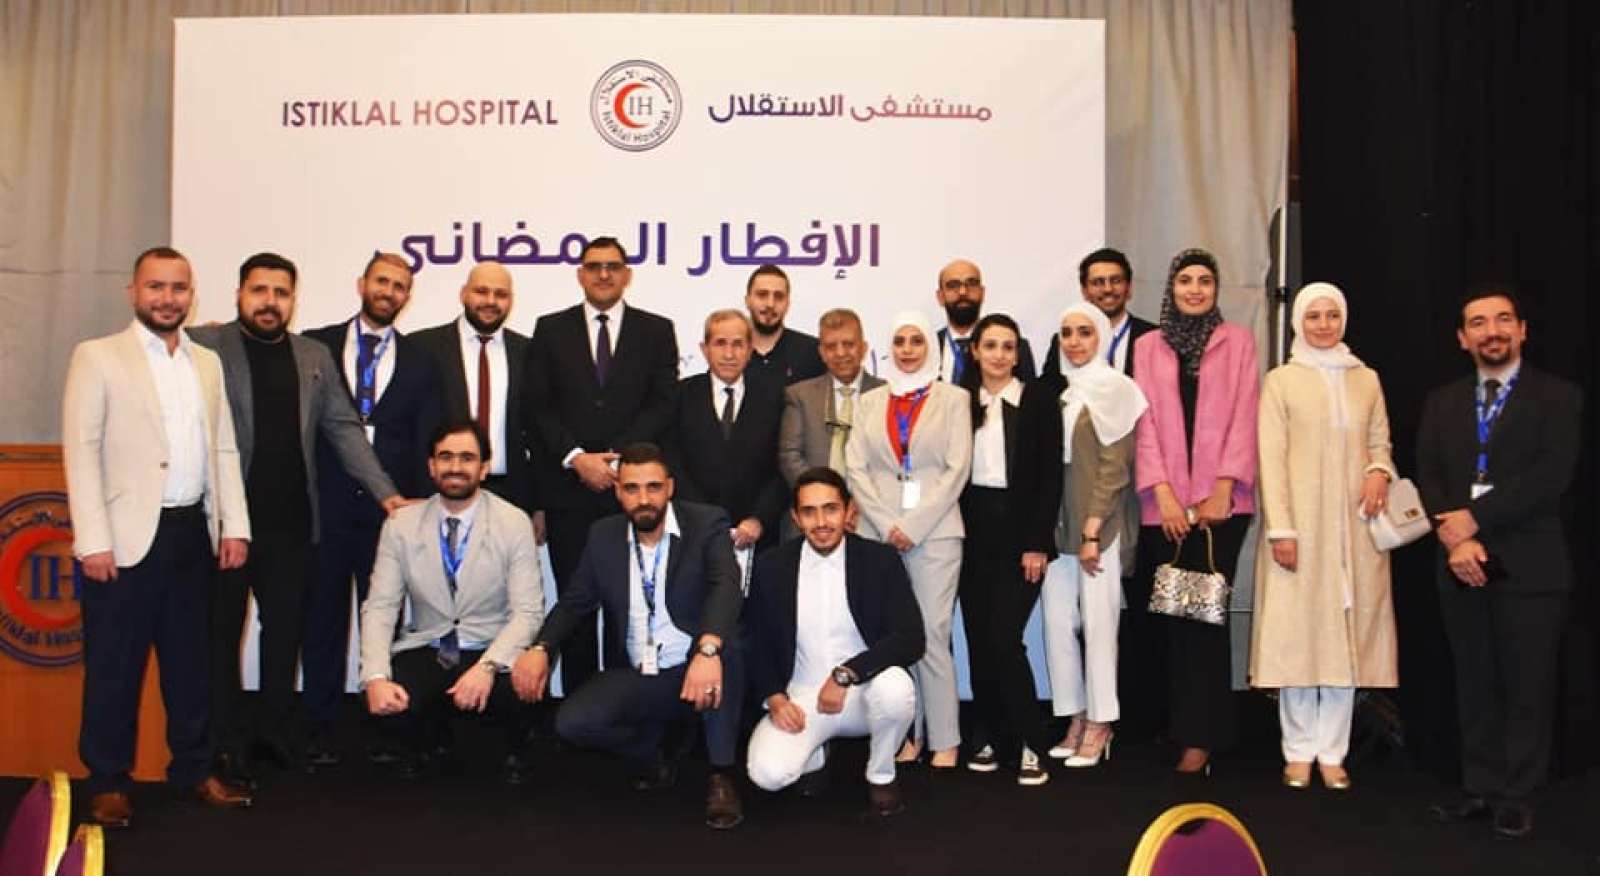 Istiklal Hospital held its annual Ramadan breakfast on Tuesday, 17 Ramadan, at the Crowne Plaza Hotel, where it hosted nearly 300 guests of doctors, partners, and national figures to celebrate Ramadan